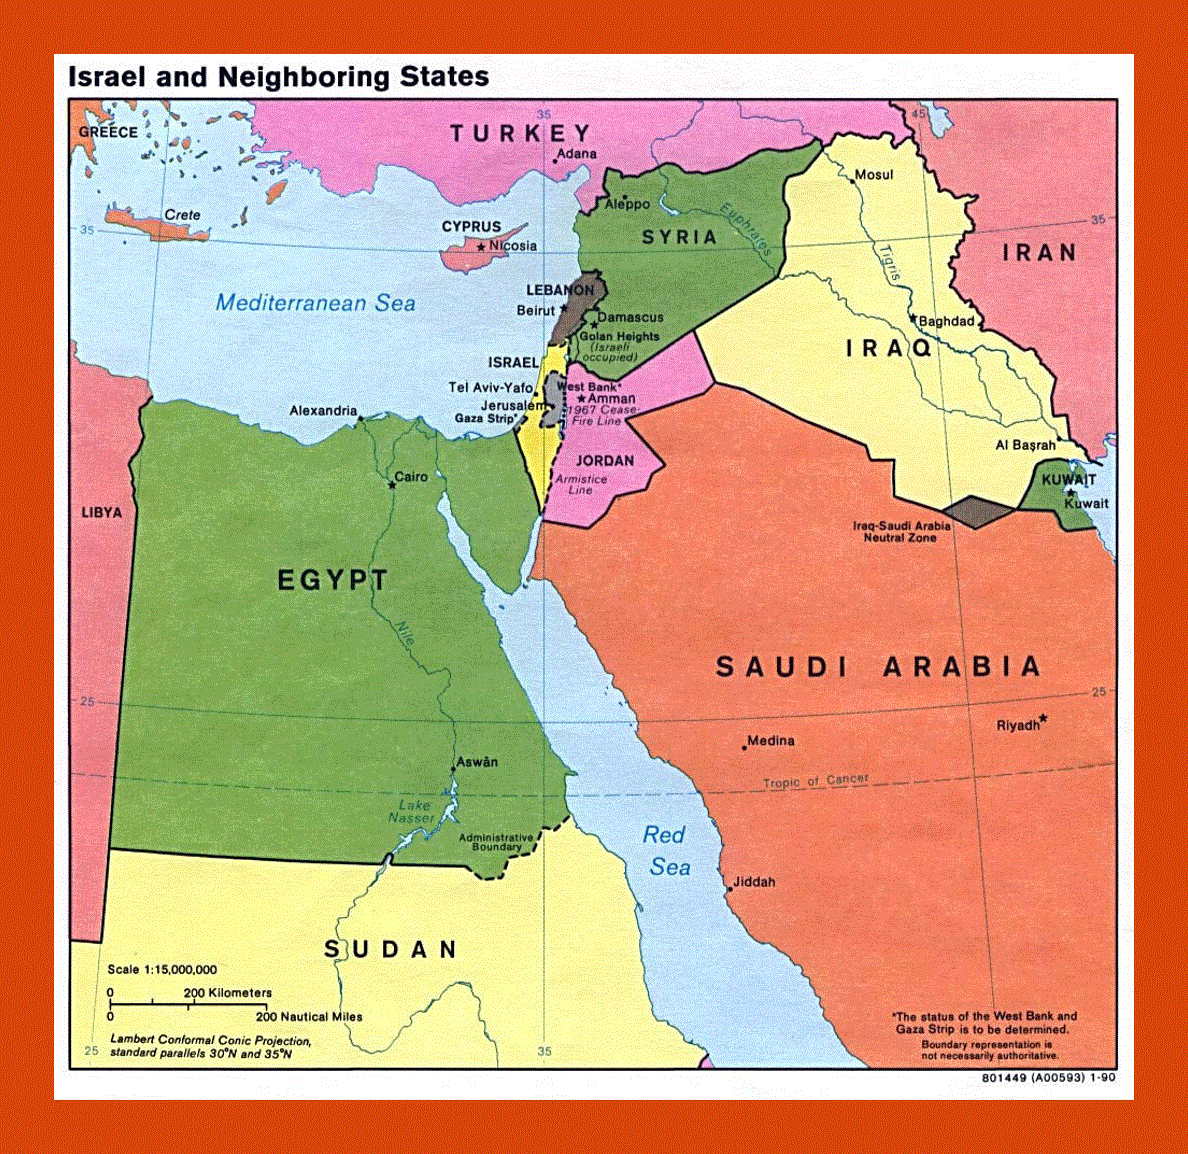 Map of Israel and Neighboring States - 1990